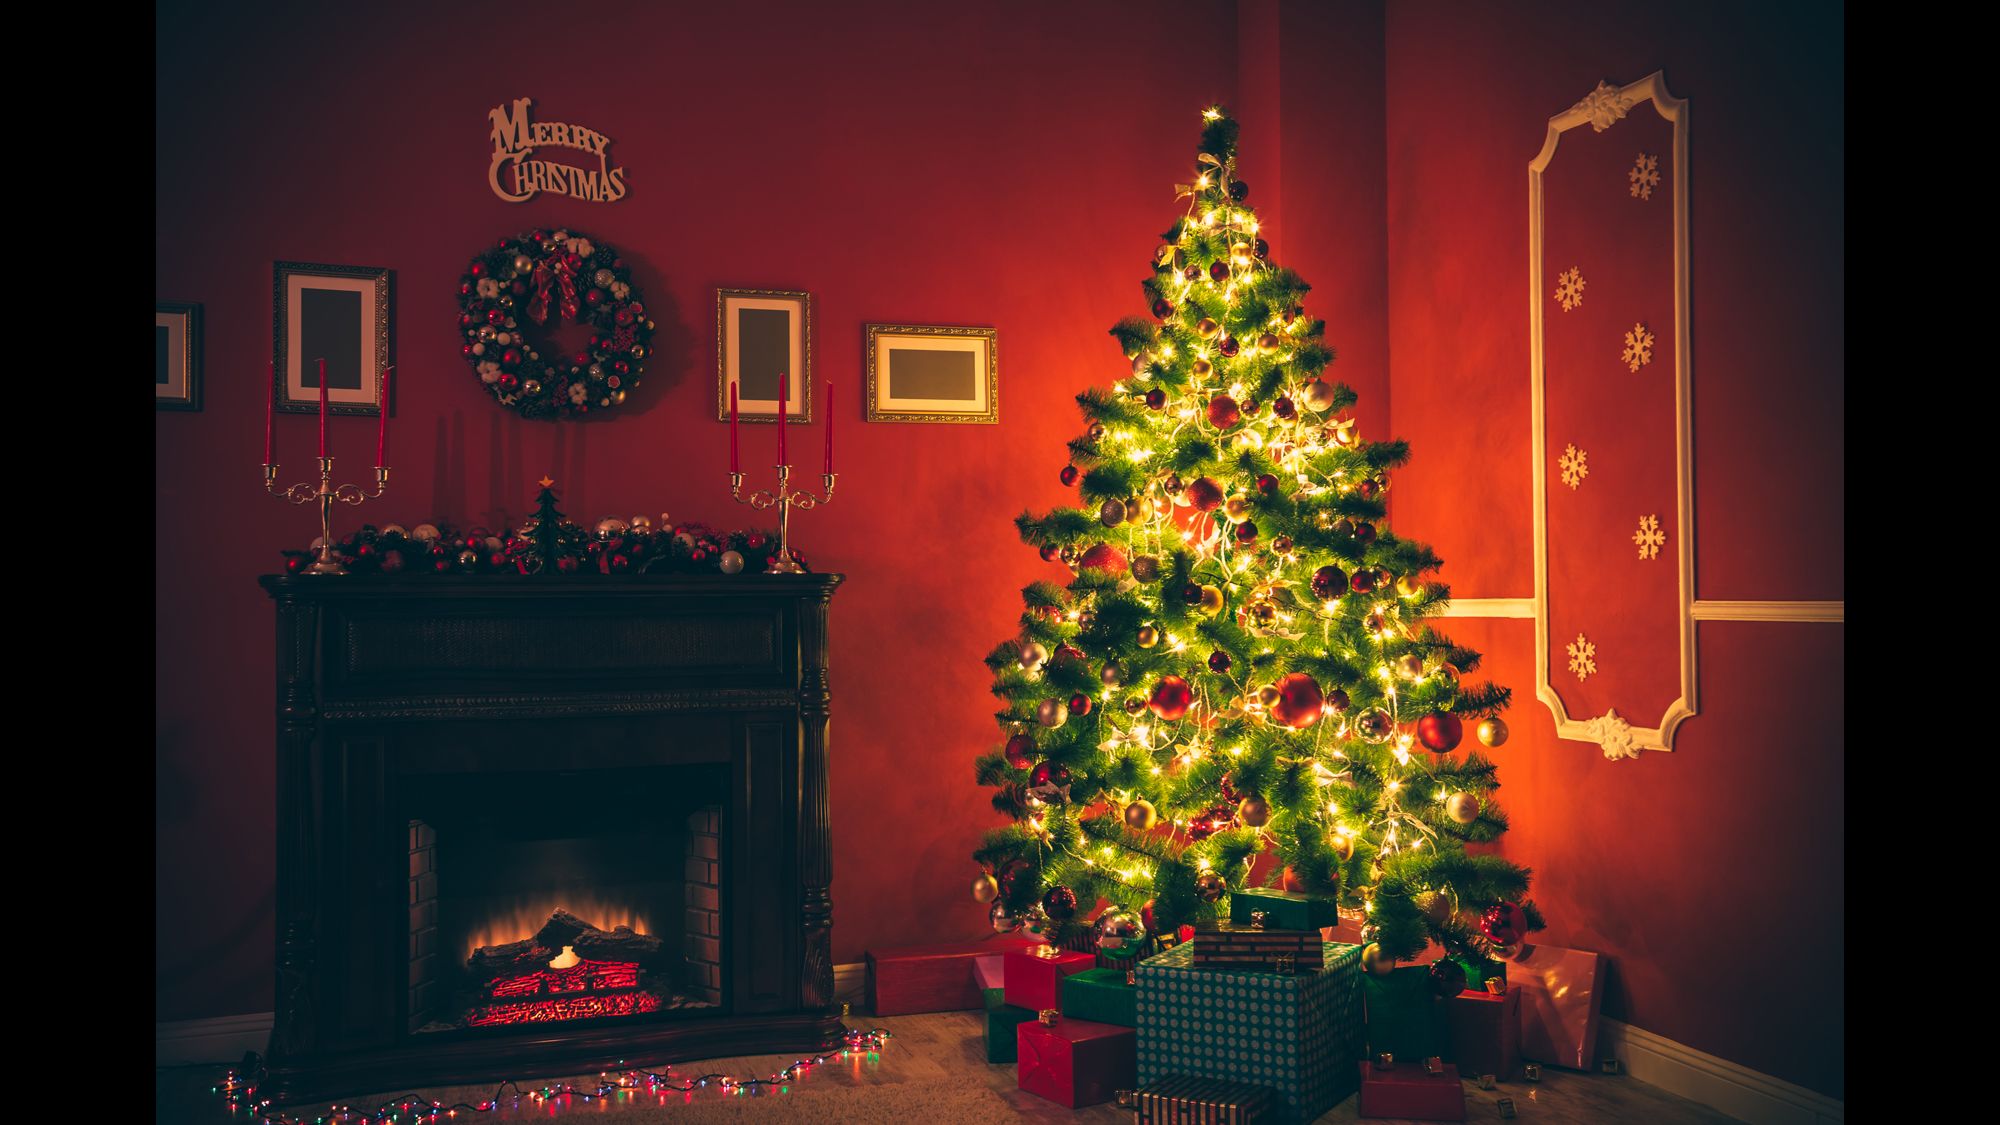 Fascinating origins of Christmas traditions